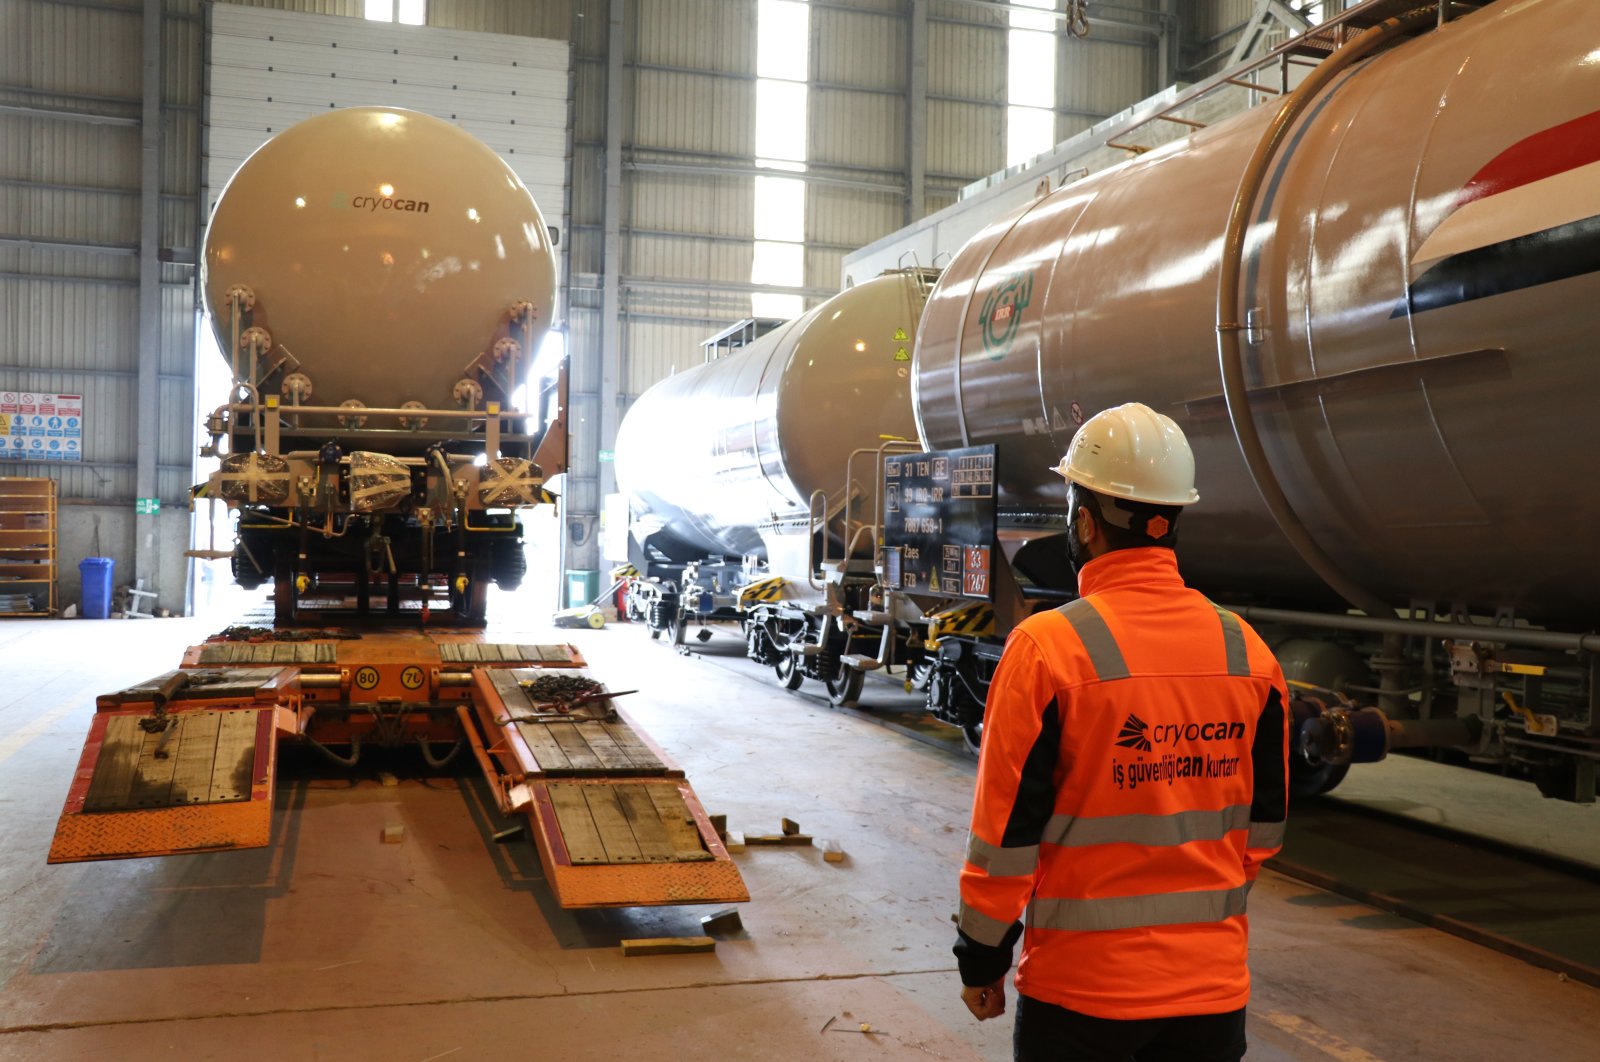 Tank cars are loaded onto trucks for delivery to Iraq in the northwestern Kocaeli province, Turkey, Feb. 13, 2021. (AA Photo)